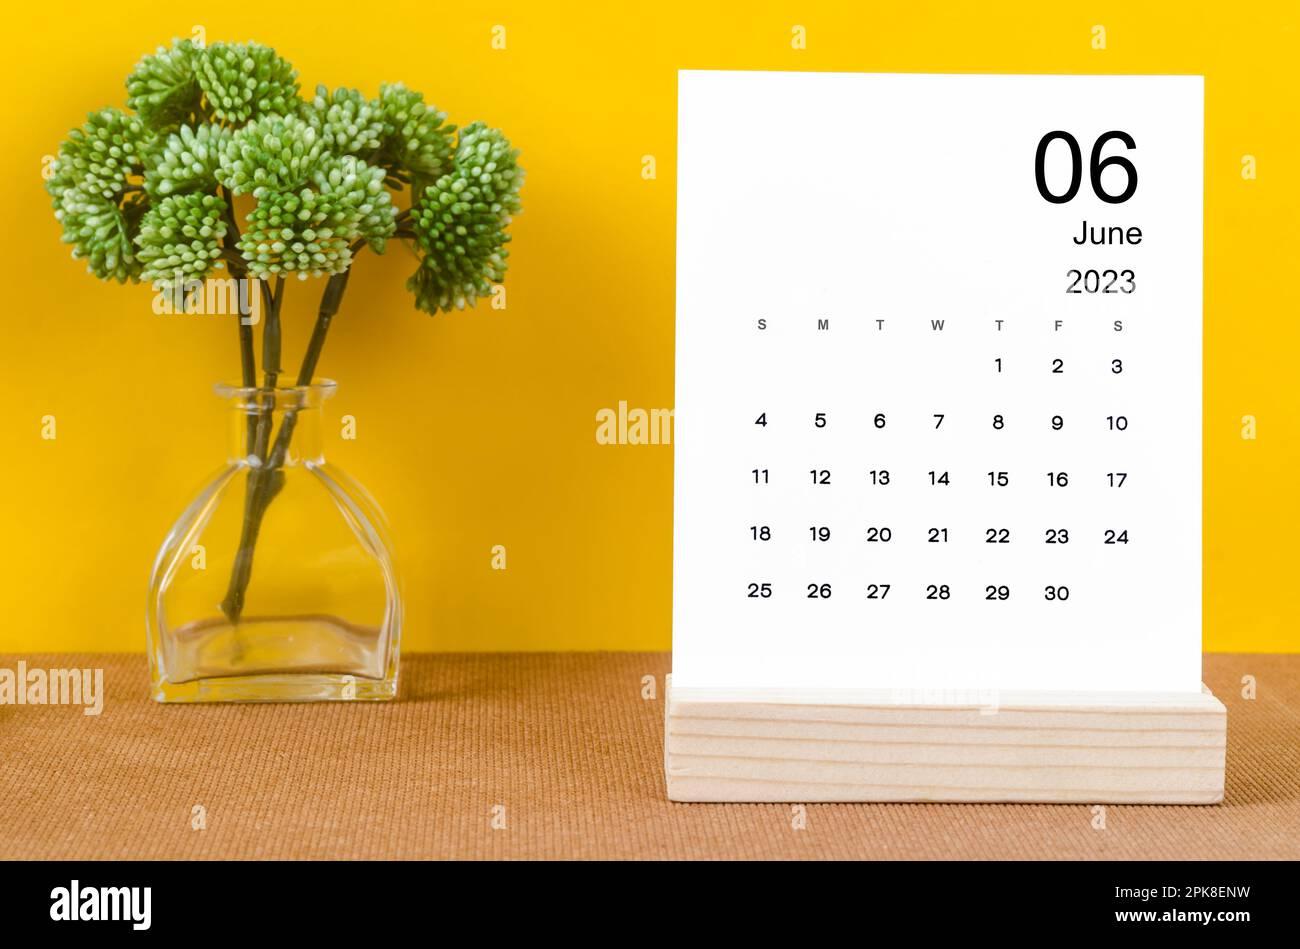 June 2023 Monthly desk calendar for 2023 year on yellow background